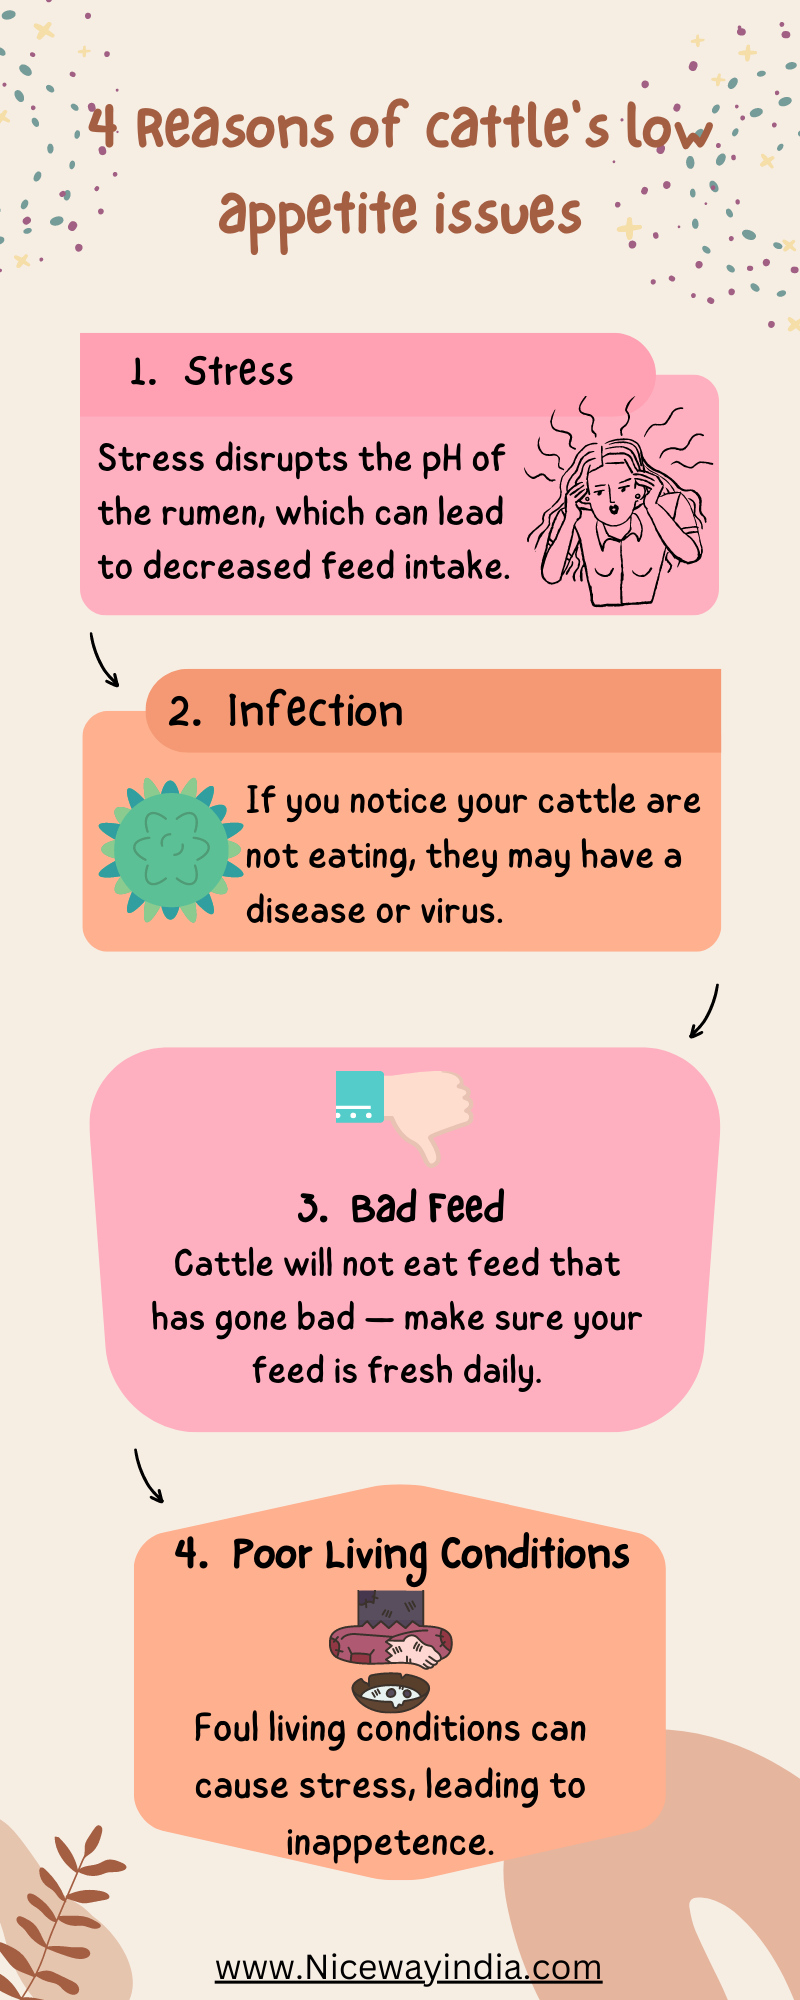 Y Reasons of cattle's low: :
:~.- appetite issues

1. Stress

Stress disrupts the pH of
the rumen, which can lead
to decreased feed intake.

 

2. Infection

" = “ If you notice your cattle are

v

3 < . “not eating, they may have a
Fe disease or virus.

5. Bad Feed
Cattle will not eat feed that
has gone bad — make sure your
feed is fresh daily.

\

4. Poor Living Conditions

<r

Foul living conditions can
cause stress, leading to

NJ inappetence.
=
\

NS

www.Nicewayindia.com